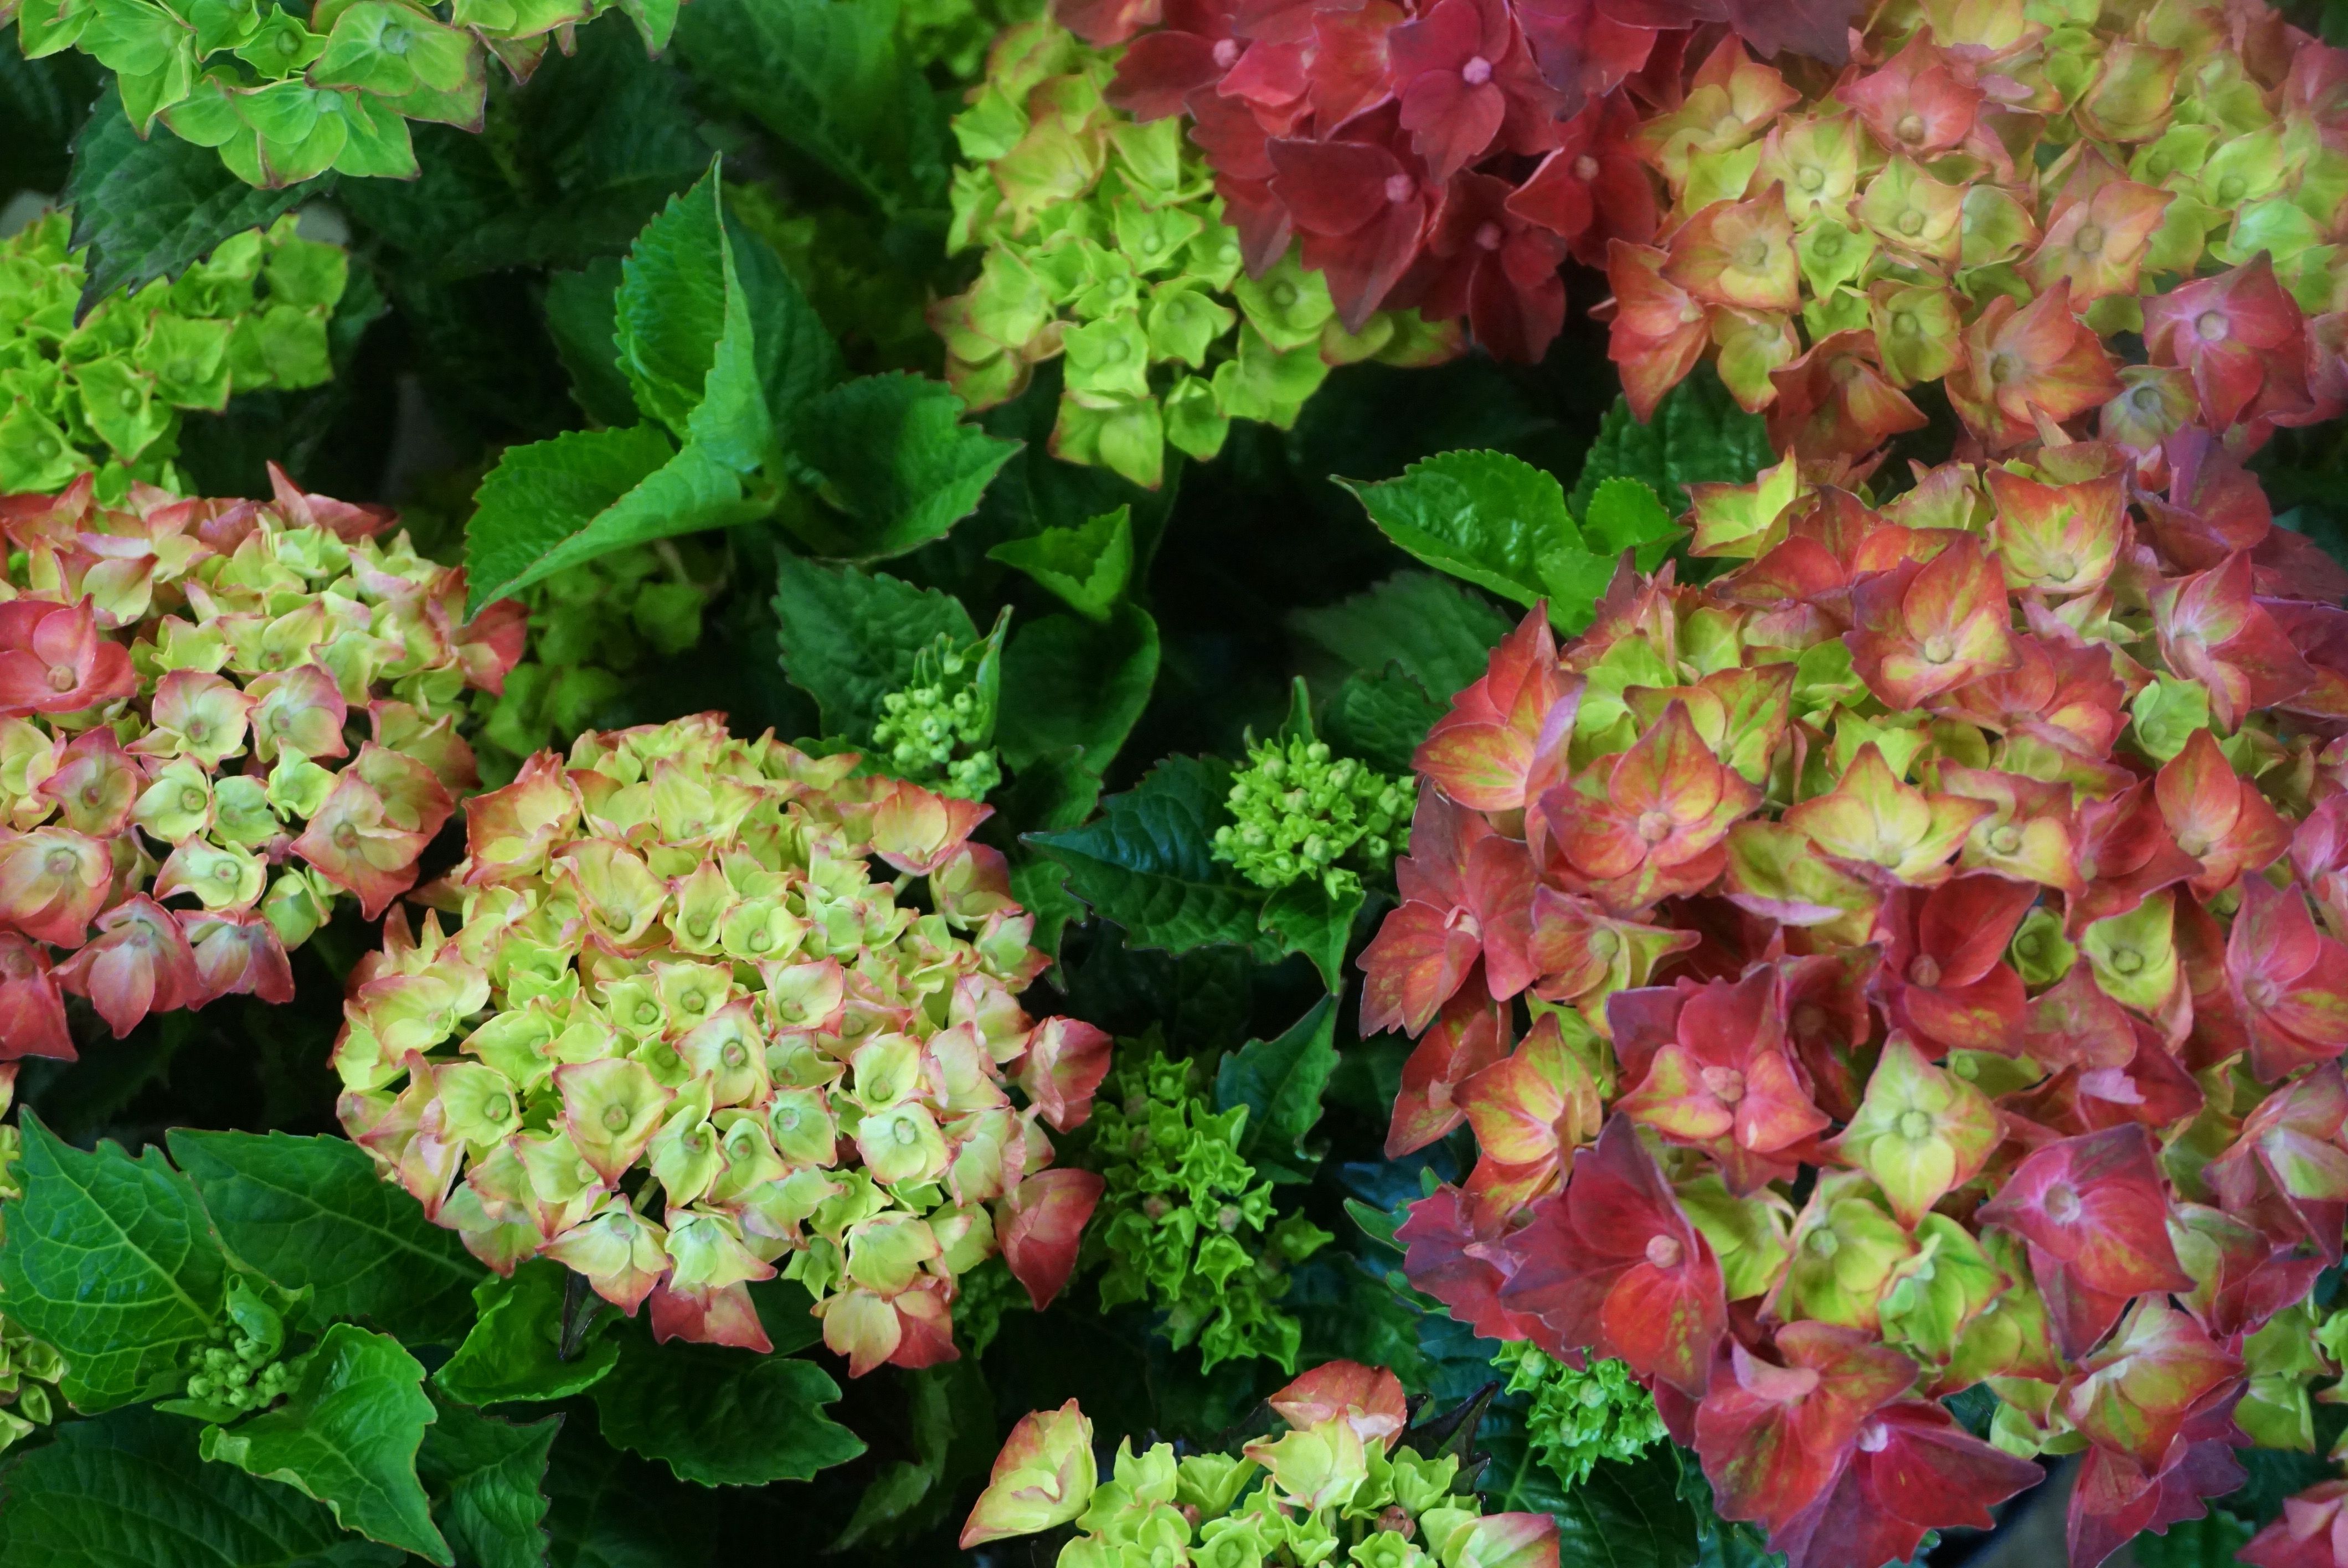 images/plants/hydrangea/hyd-magical-everlasting-crimson/hyd-magical-everlasting-crimson-0014.jpg